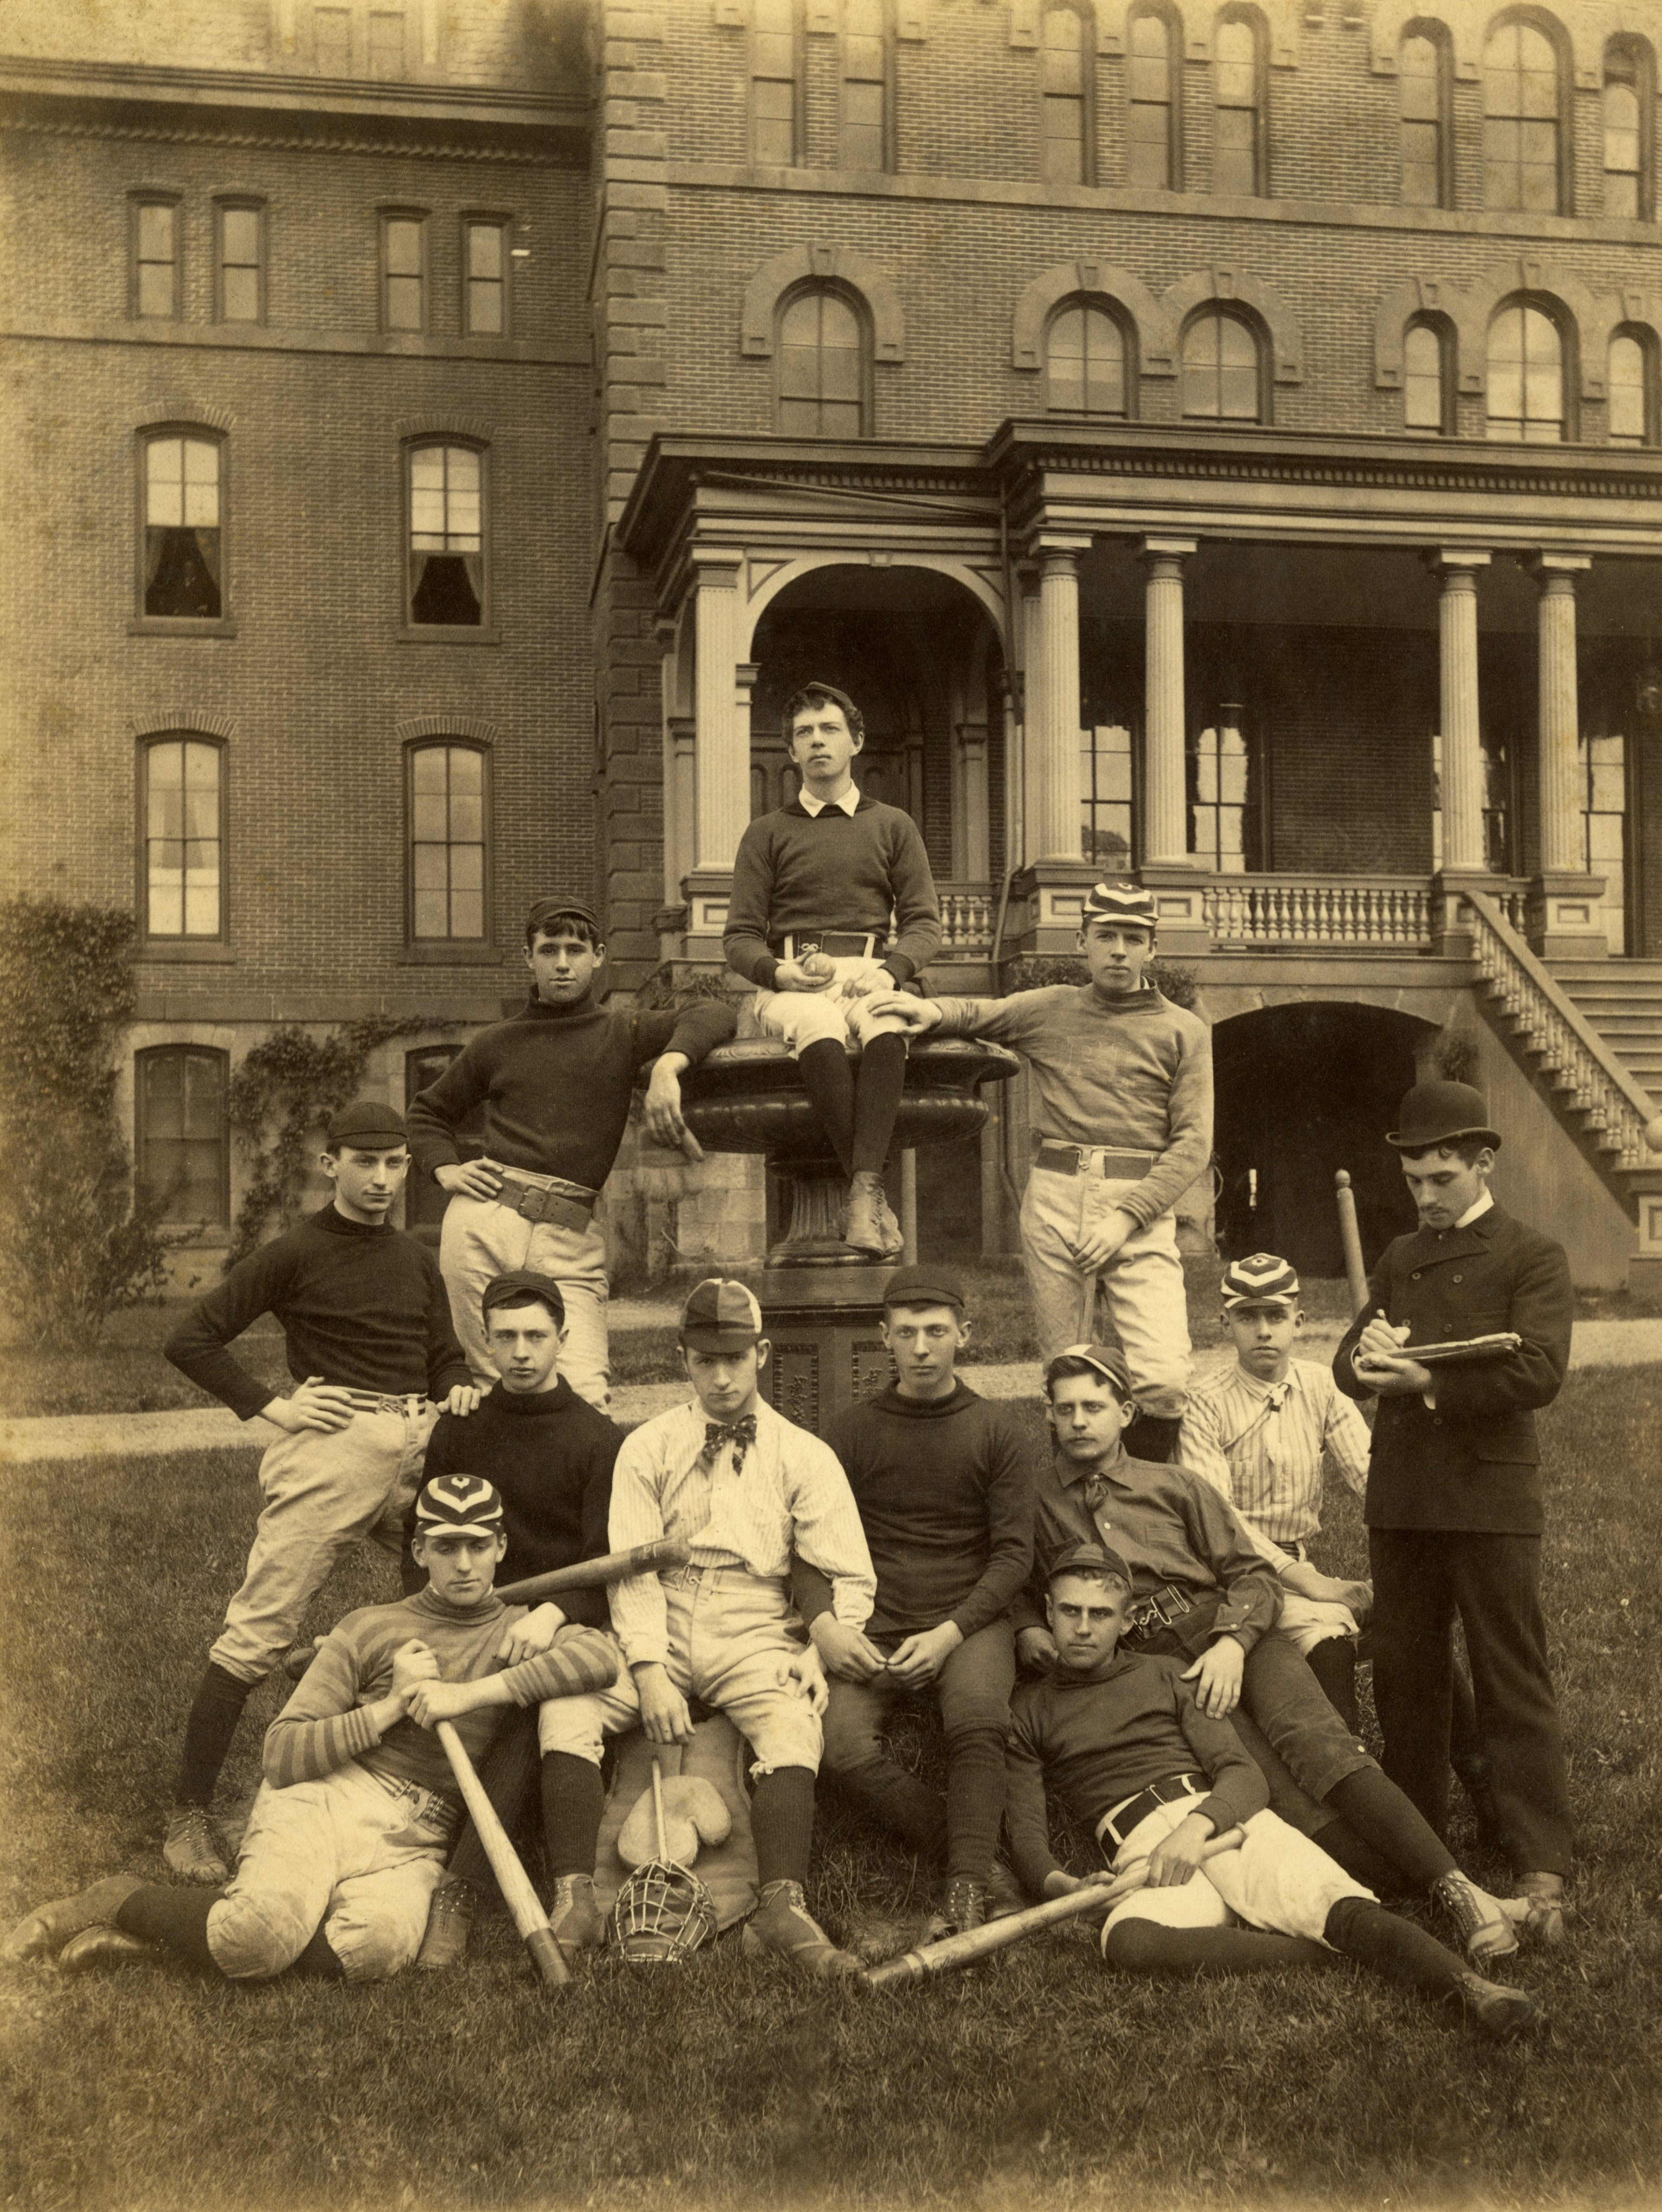 Members of a baseball team at Peddie Institute, a private boarding school in Hightstown, N.J., gather for a group photograph in front of the main school building, May 1891.